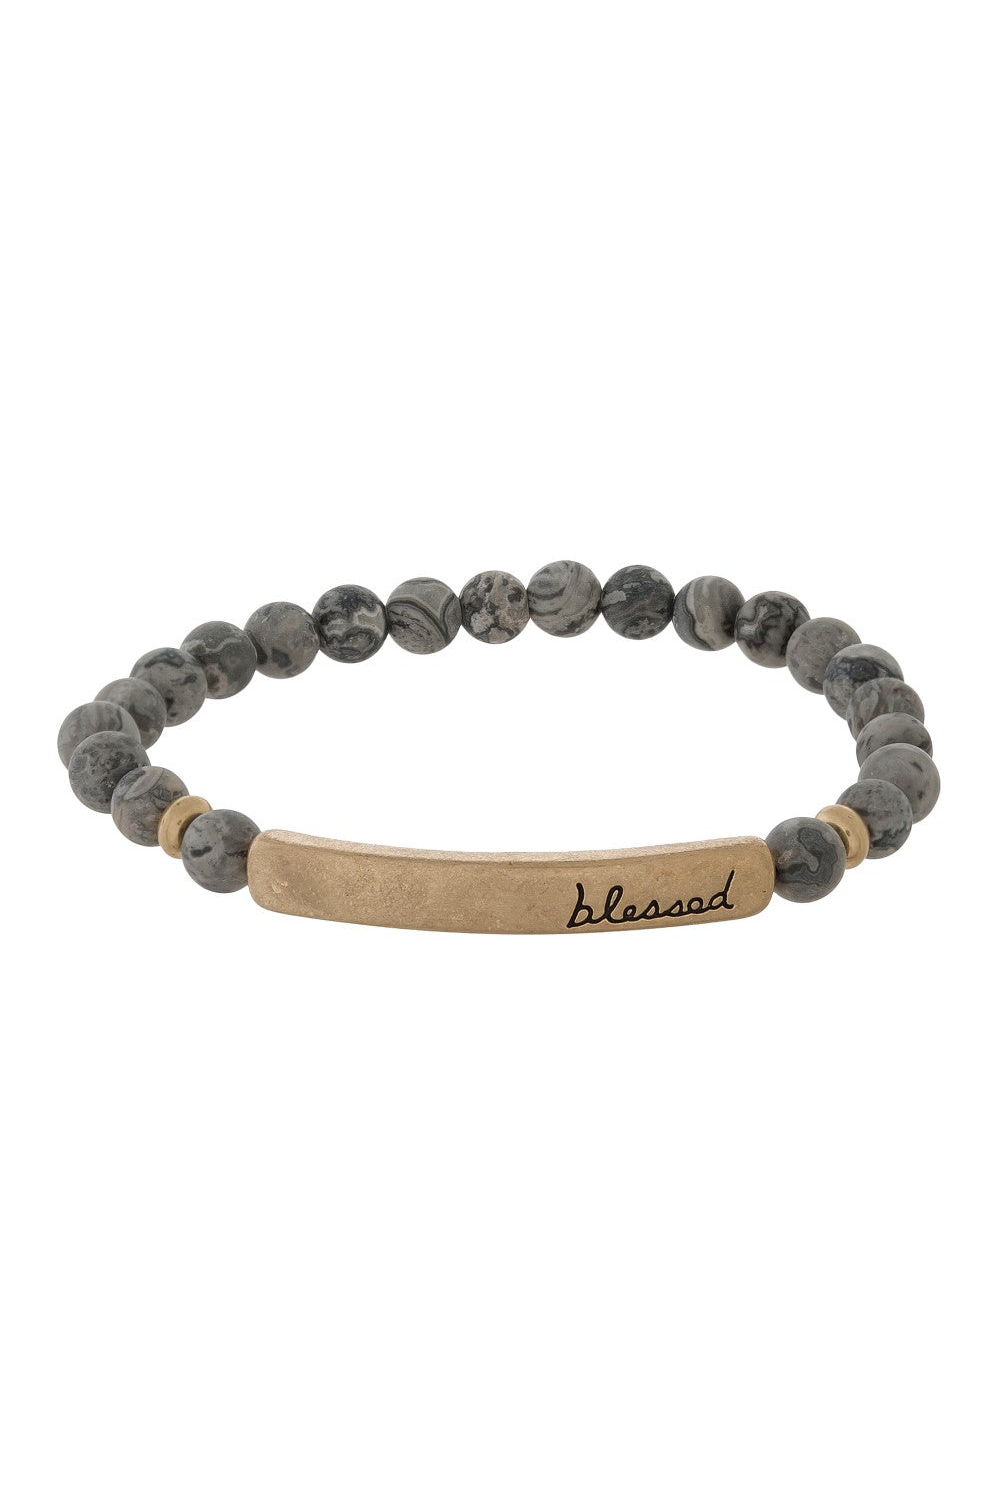 Blessed Stone Stretch Bracelet |3 colors|